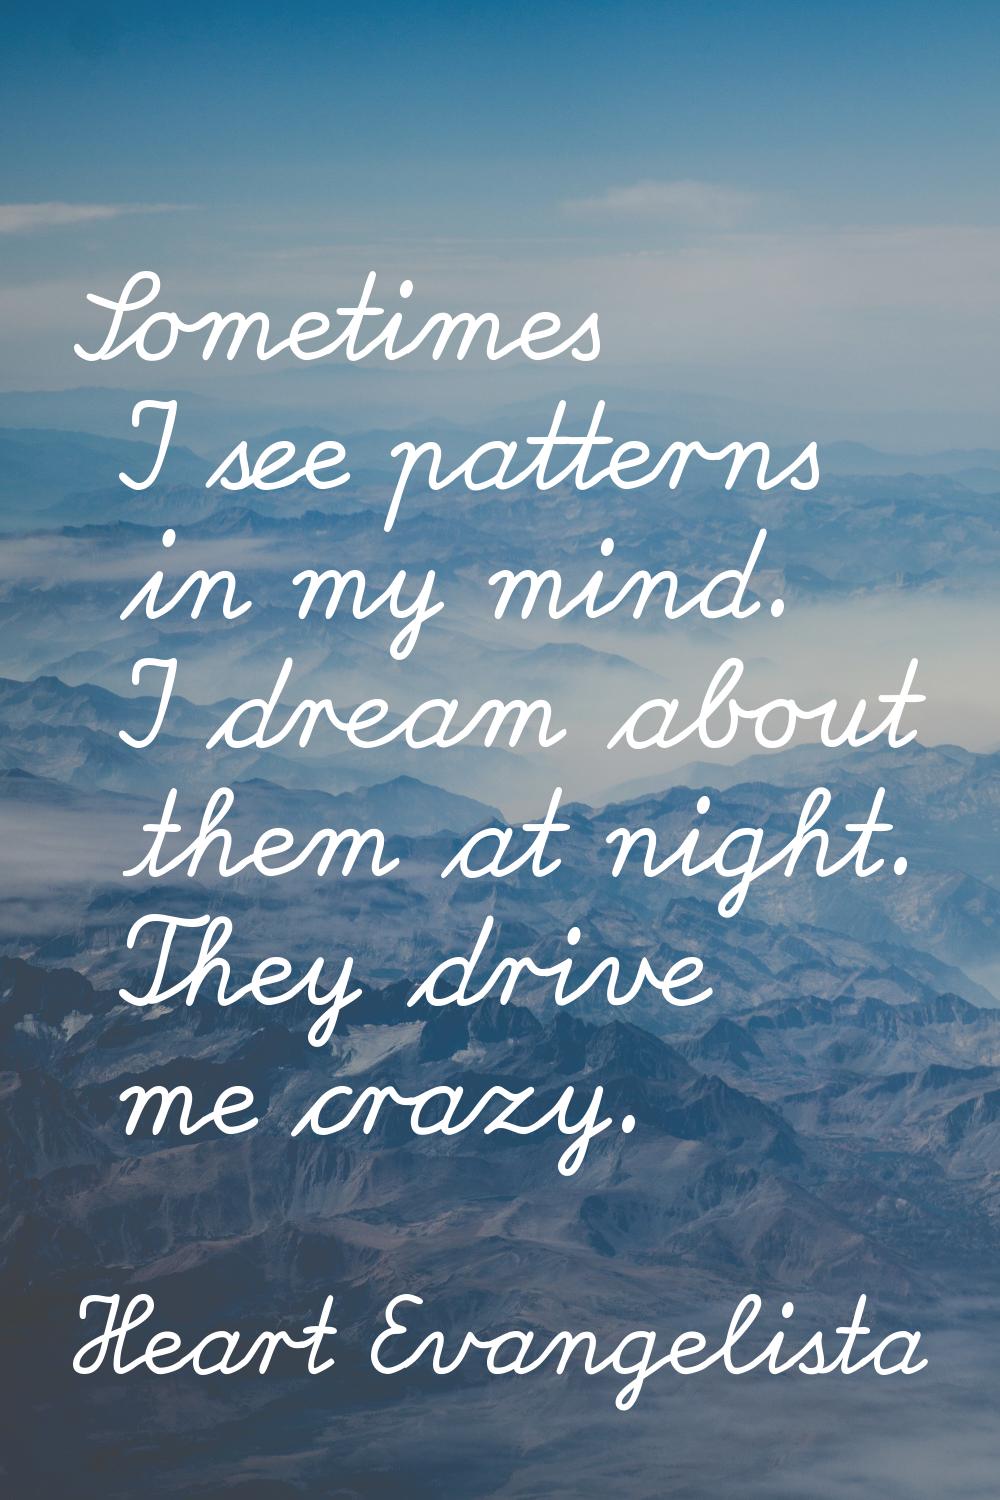 Sometimes I see patterns in my mind. I dream about them at night. They drive me crazy.